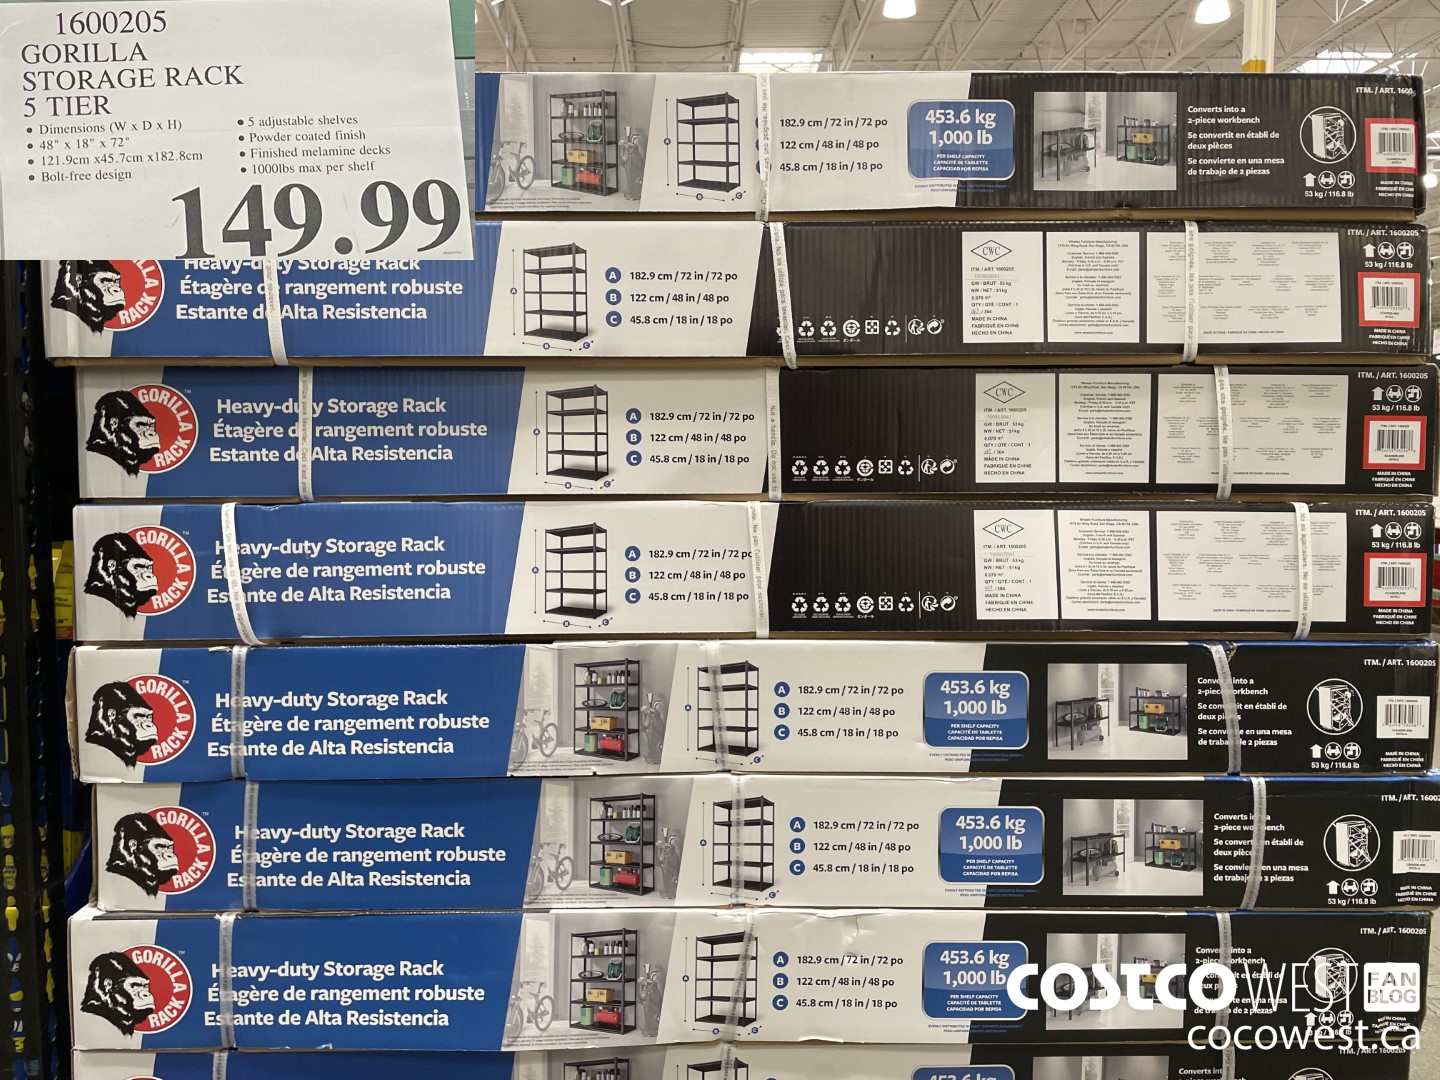 Costco] Gorilla storage rack both commercial and non commercial 120$ and  280$ - RedFlagDeals.com Forums